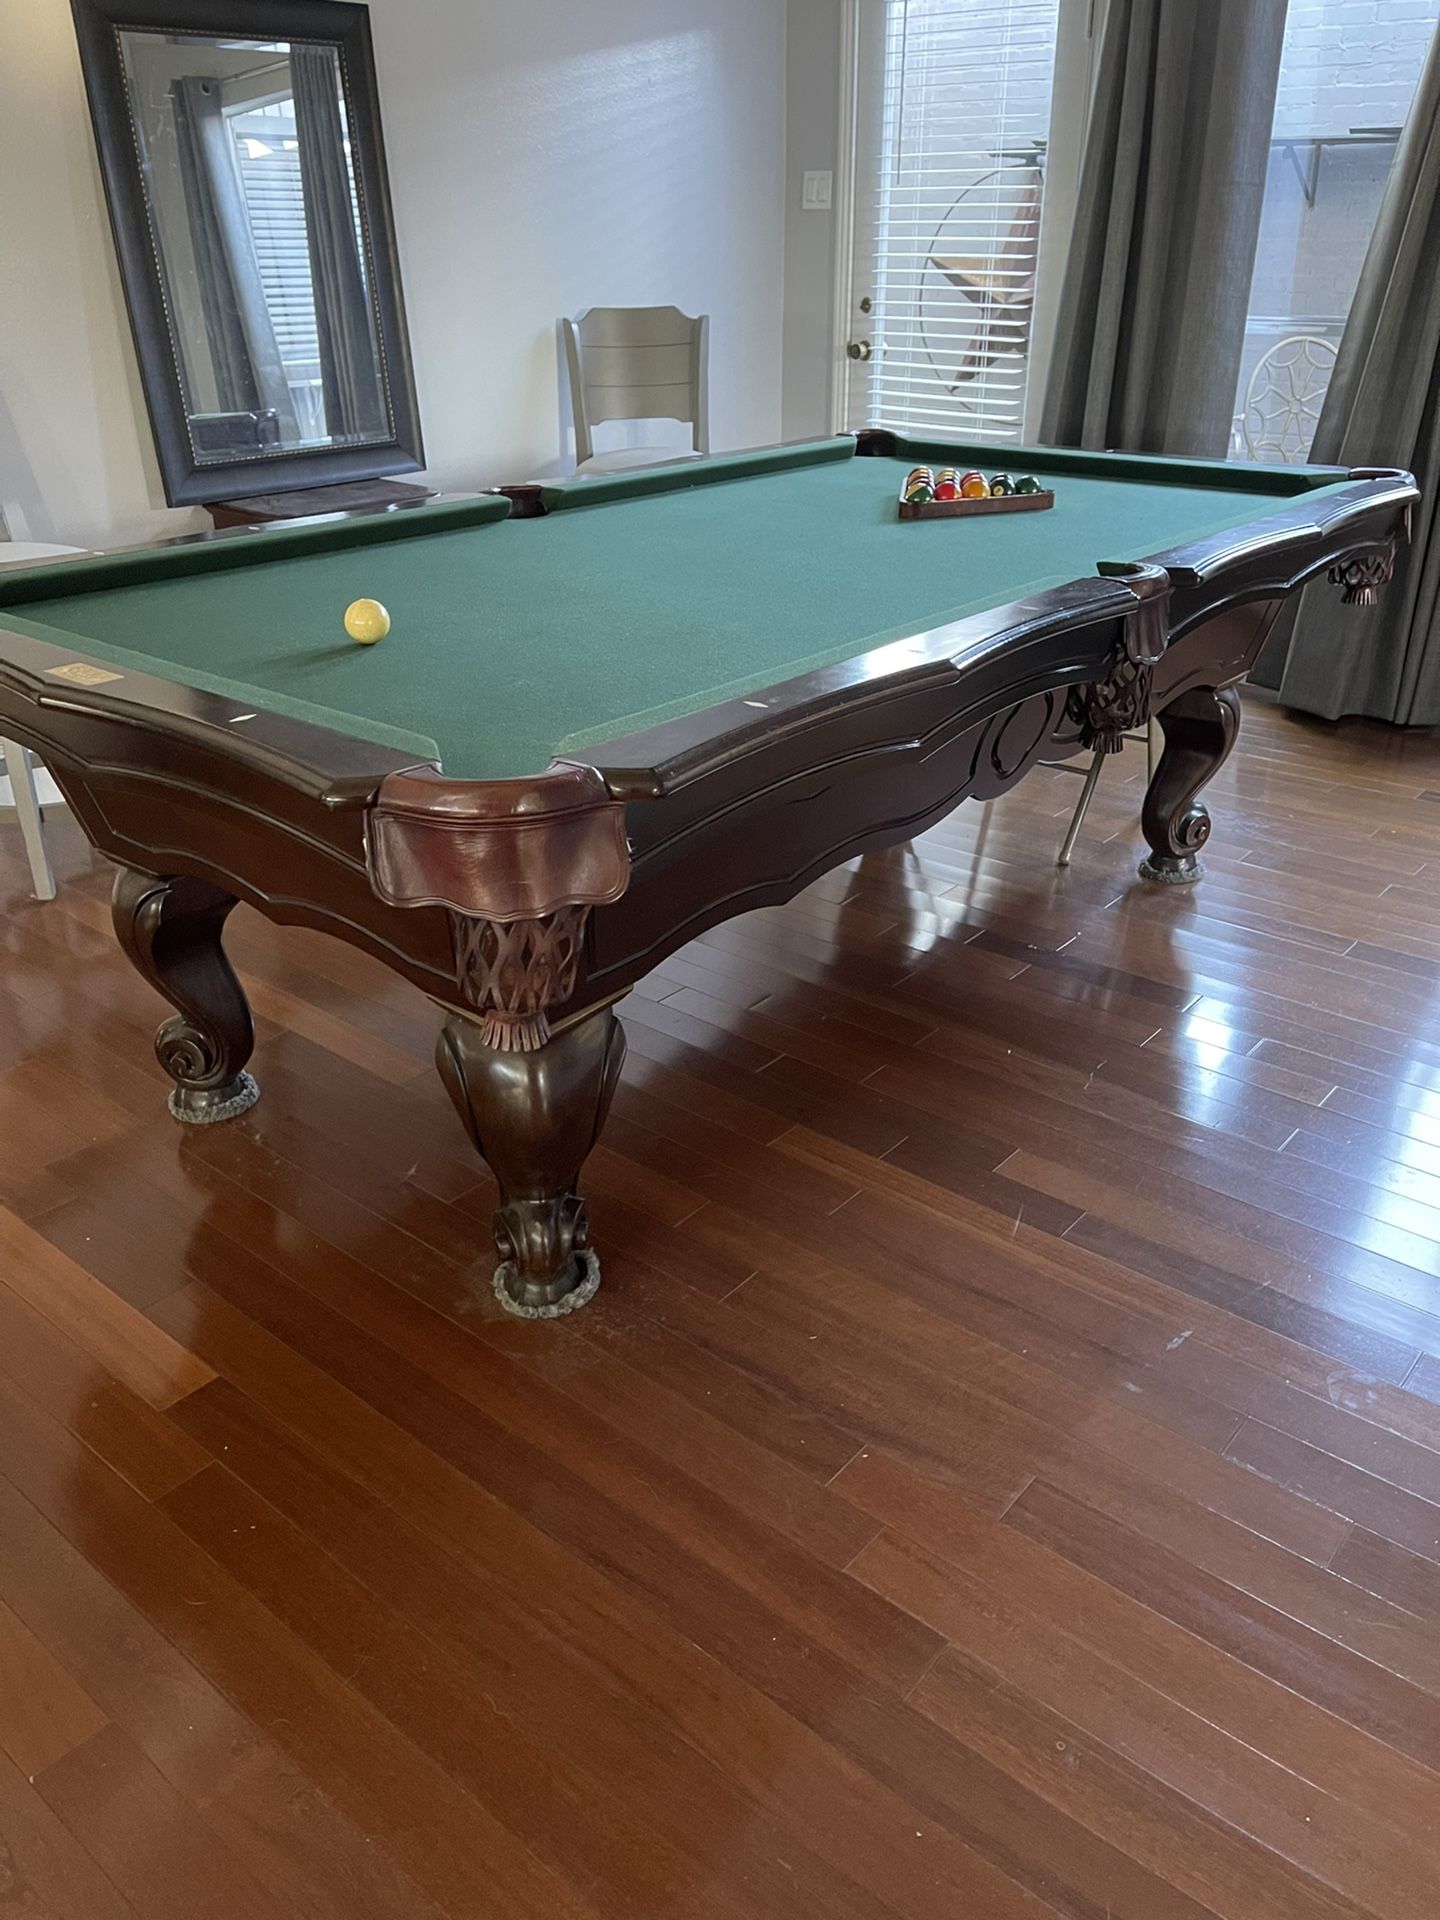 Fisher Pool Table … The C. L. Bailey Co. Edition